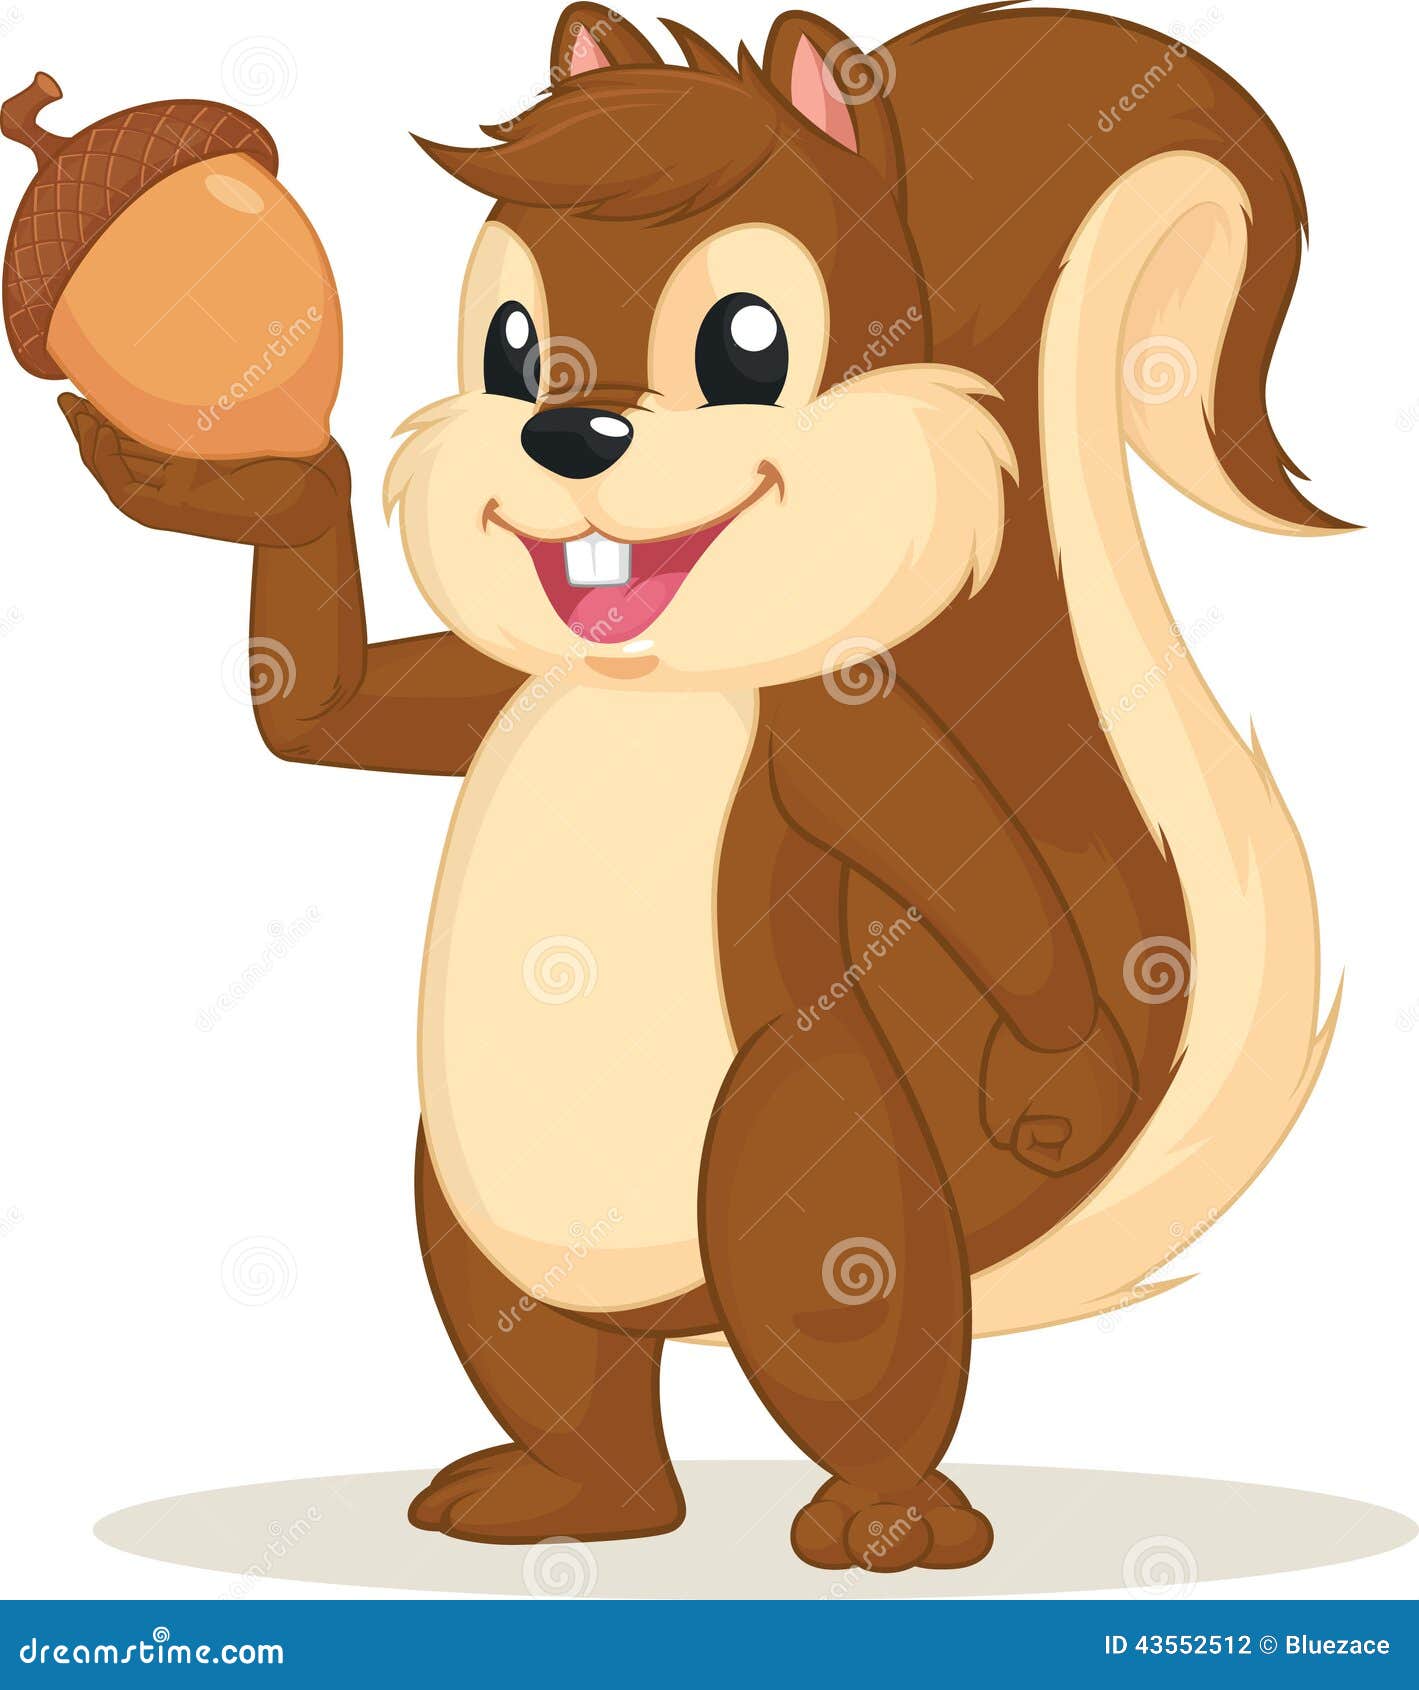 Squirrel Mascot Holding Nut Stock Vector - Image: 43552512